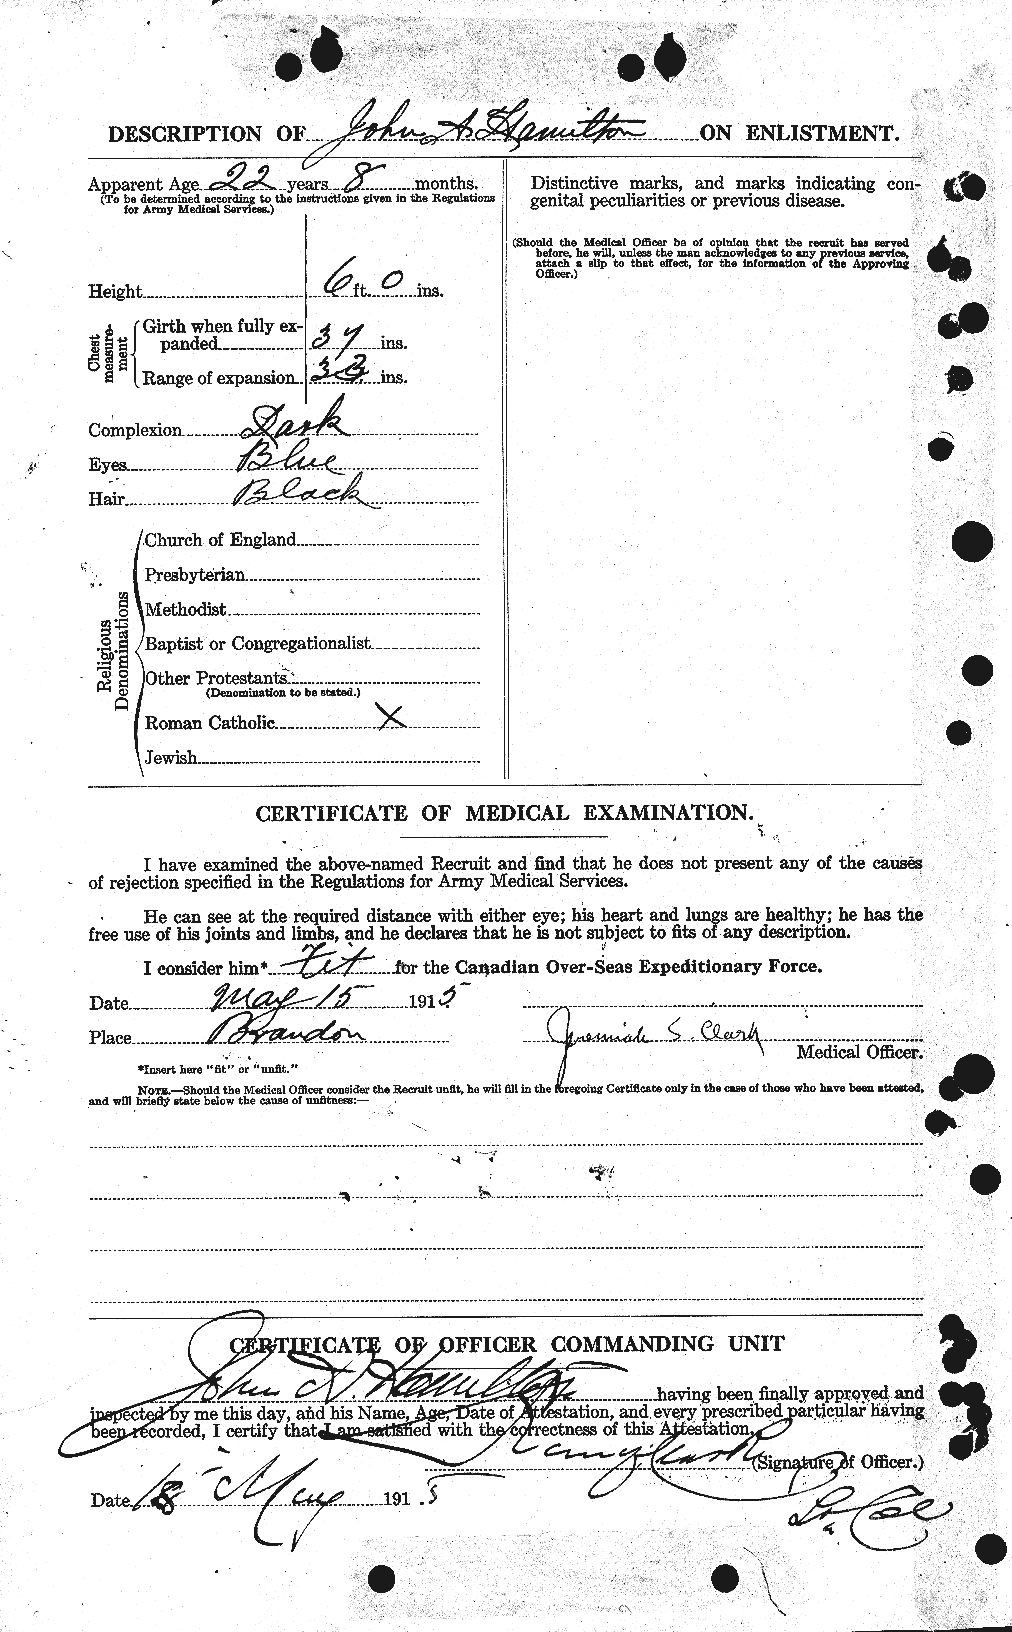 Personnel Records of the First World War - CEF 373061b